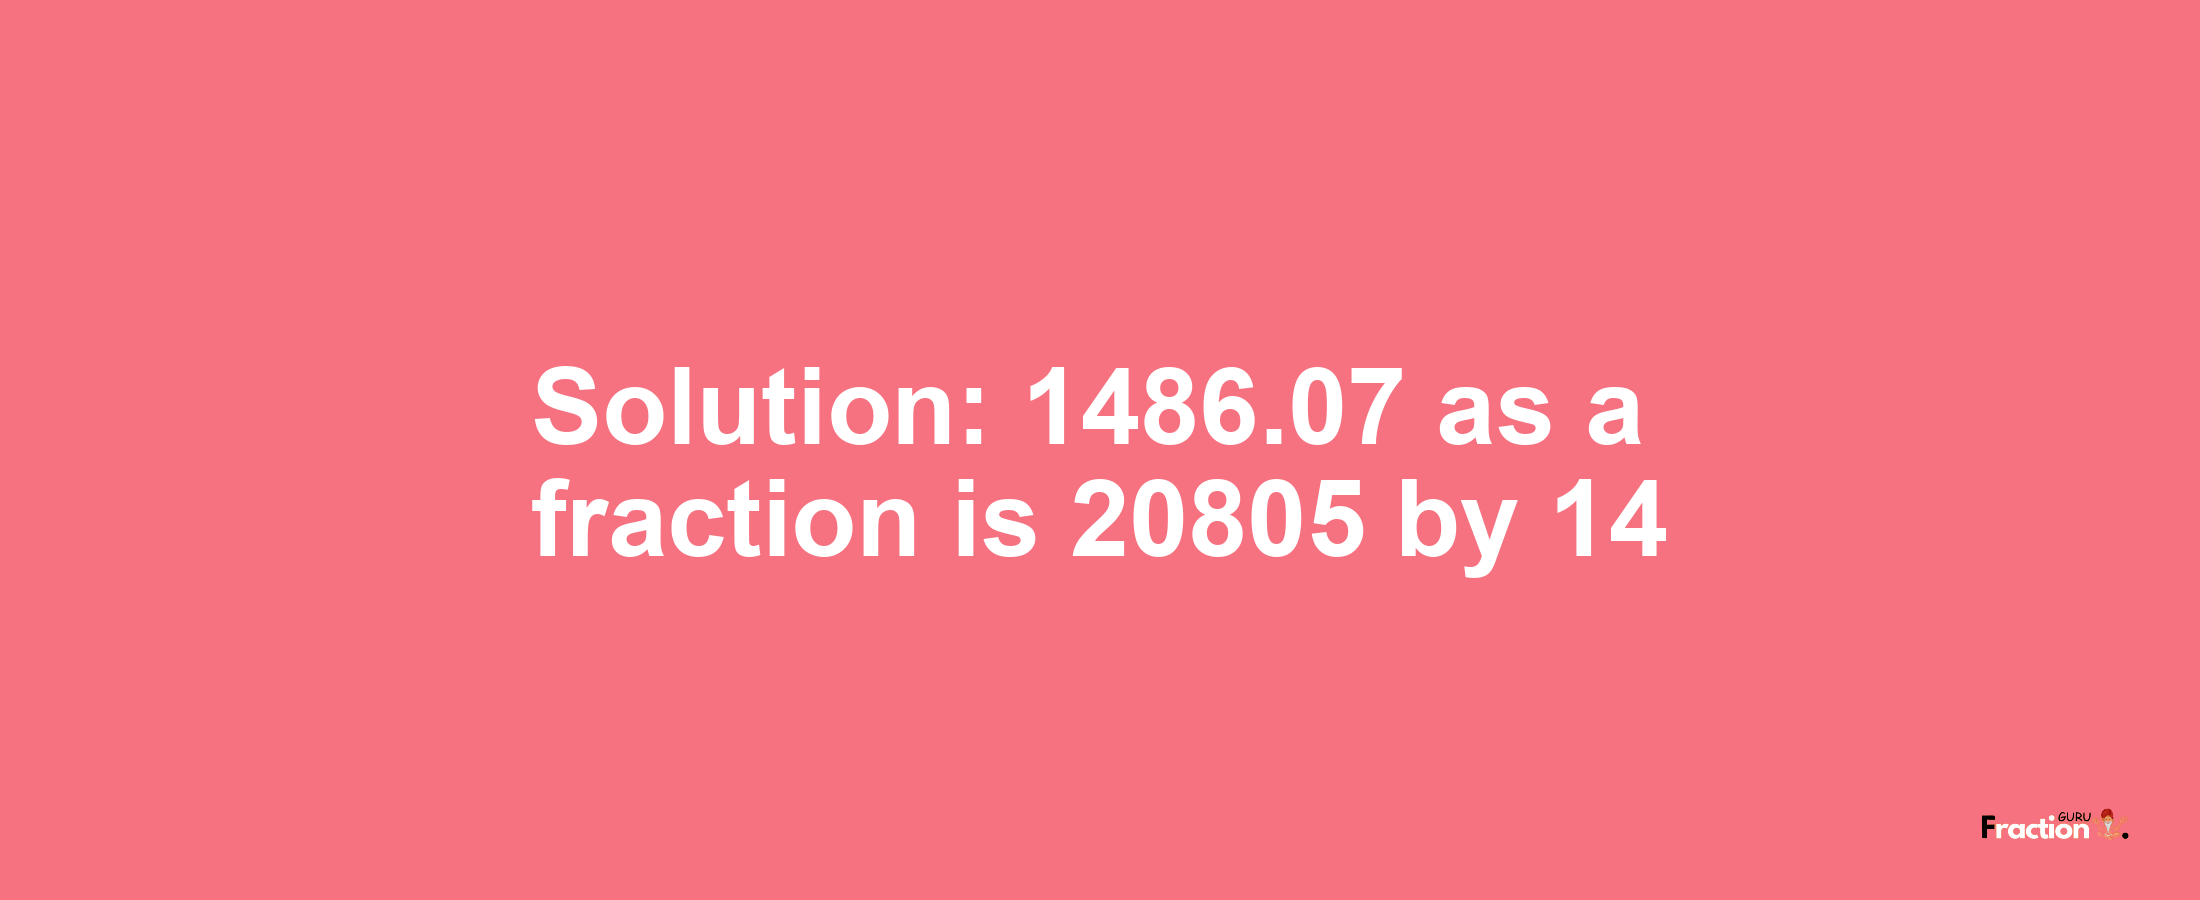 Solution:1486.07 as a fraction is 20805/14